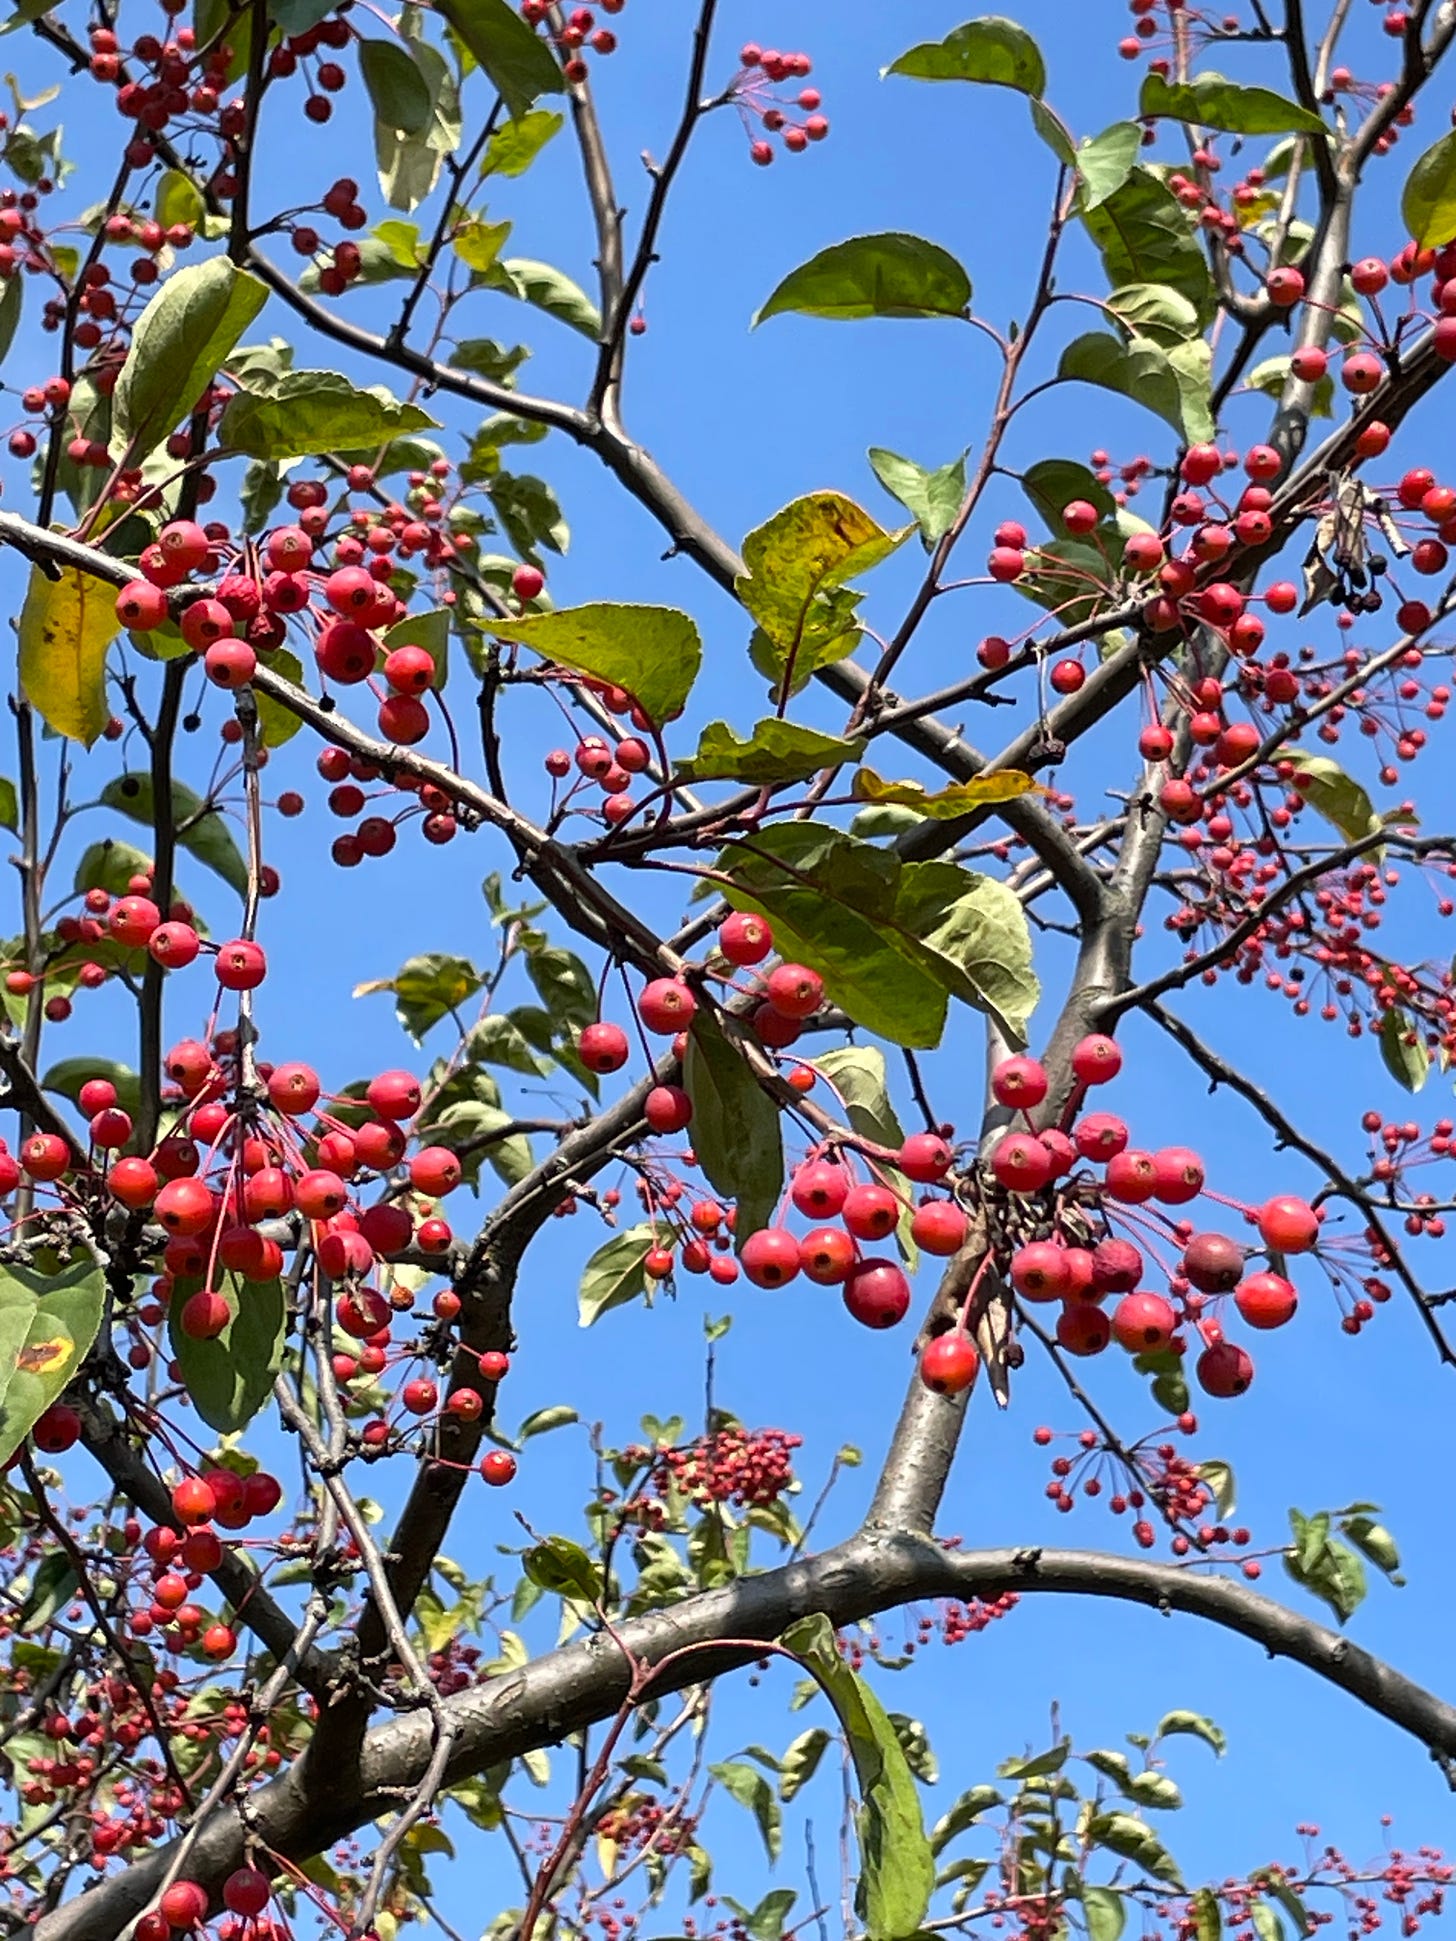 Red berries on a tree against a rich blue sky.